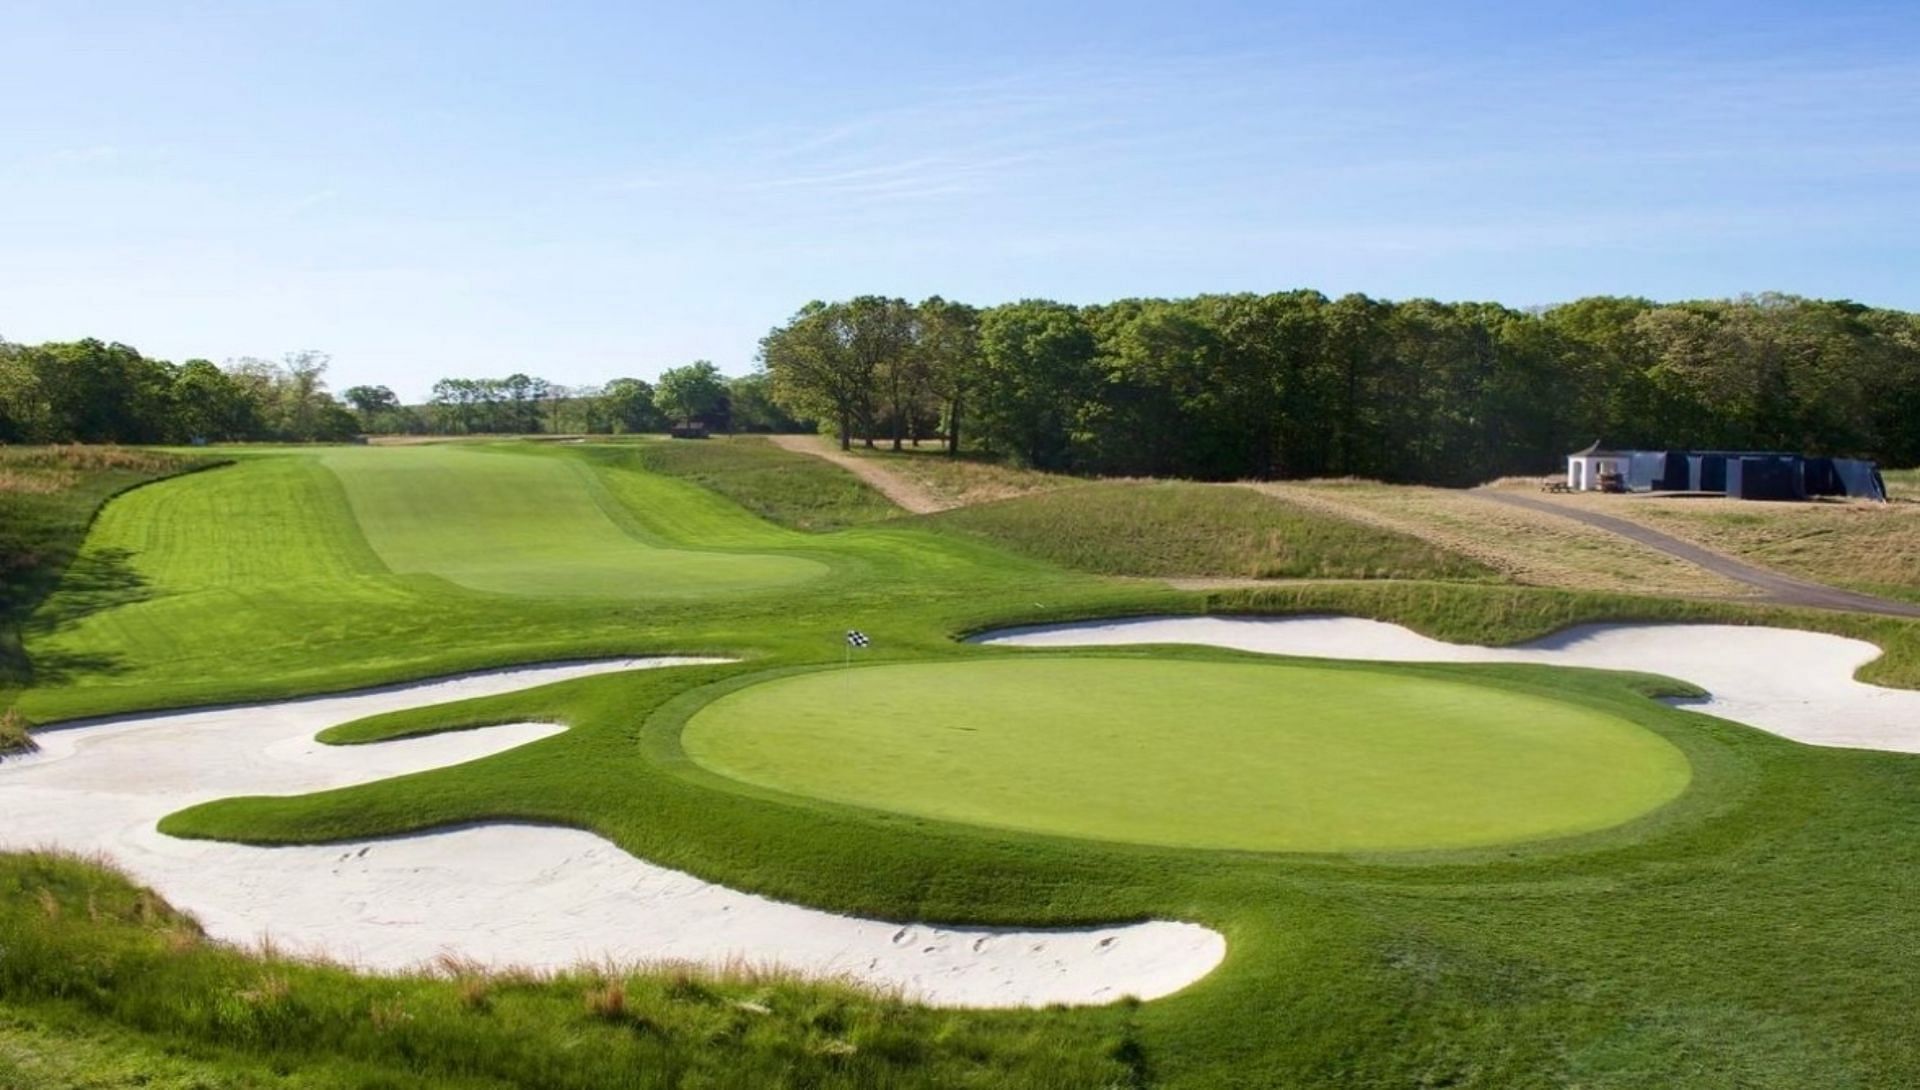 Bethpage Golf Course venues (Image via Twitter @bethpagegolfcourse).